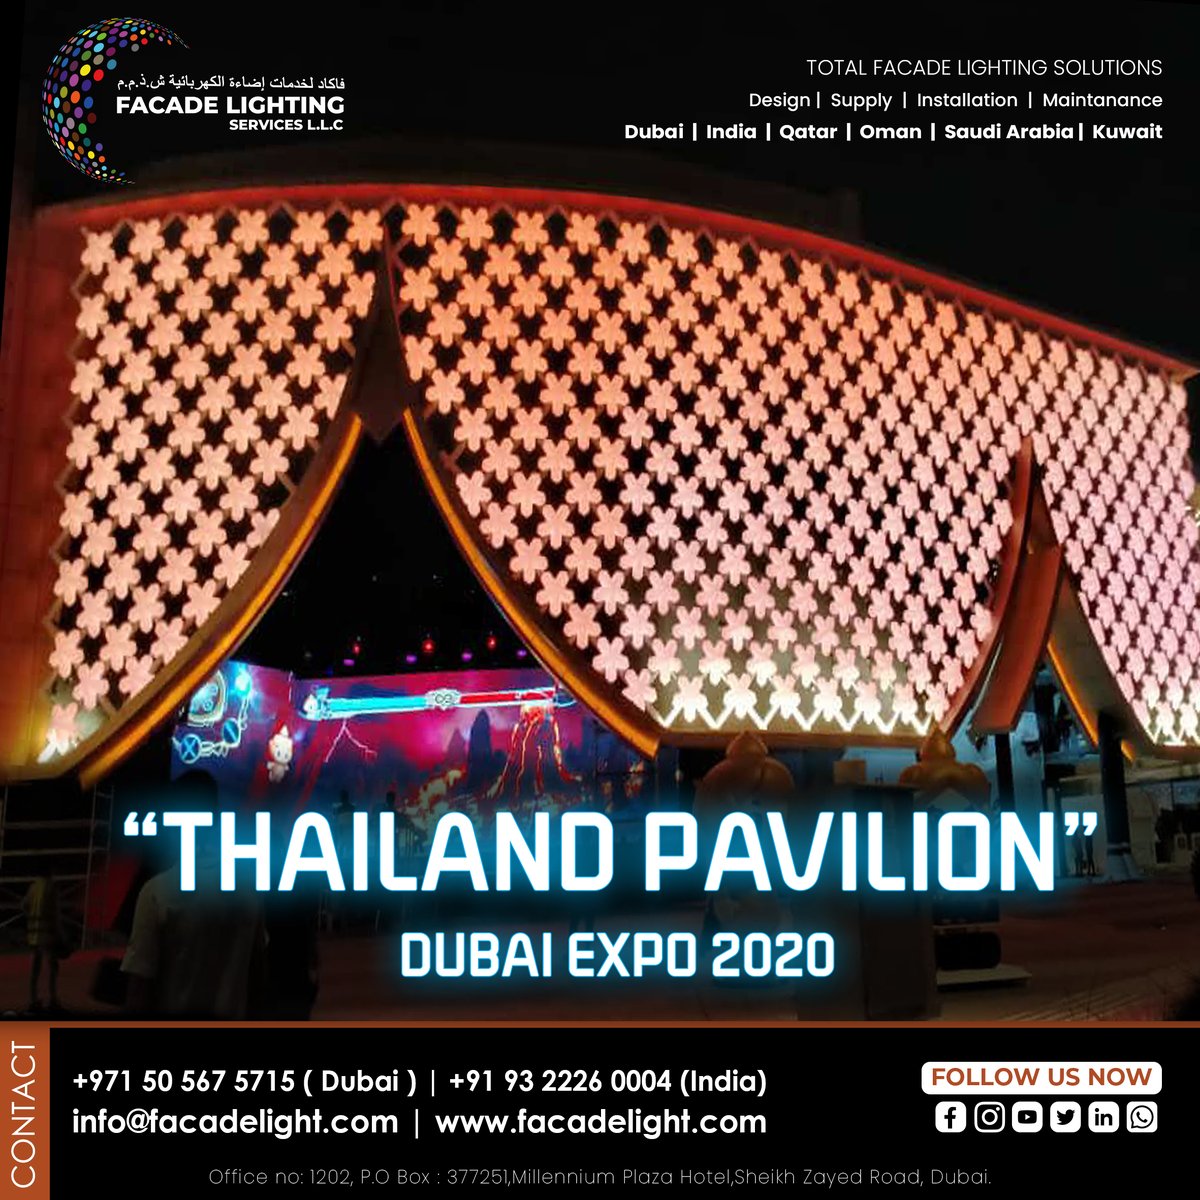 ✨ Lighting up the Thailand Pavilion at Expo 2020 Dubai! ✨

We are thrilled to showcase our #facadelighting for the Thailand Pavilion at Expo 2020 Dubai. 

#facadelighting #facadelightingservice #thailandpavilionexpo2020dubai #thailandpavilionexpo2020 #dubai #india #uae #qatar